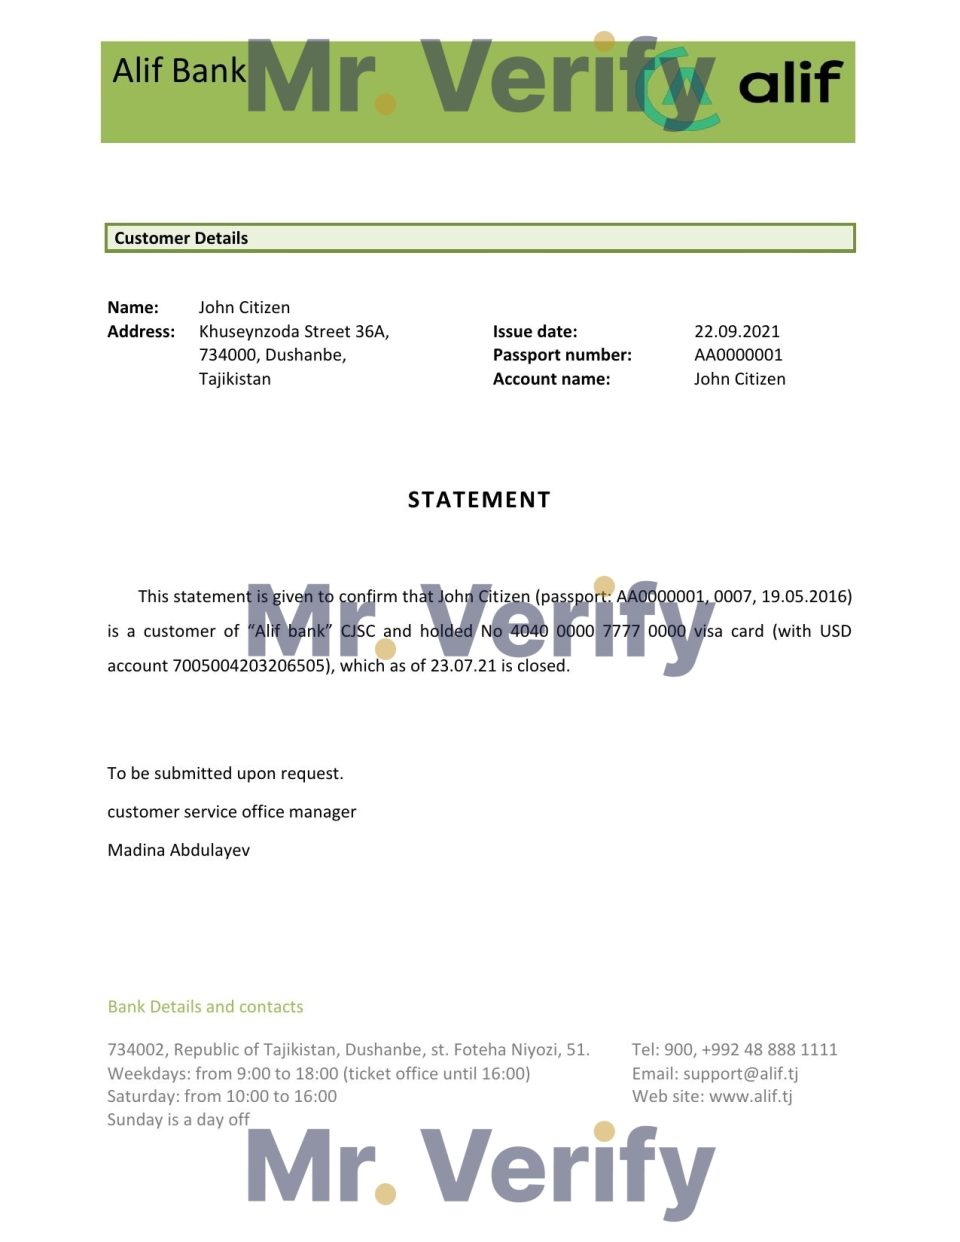 Download Tajikistan Alif Bank Reference Letter Templates | Editable Word